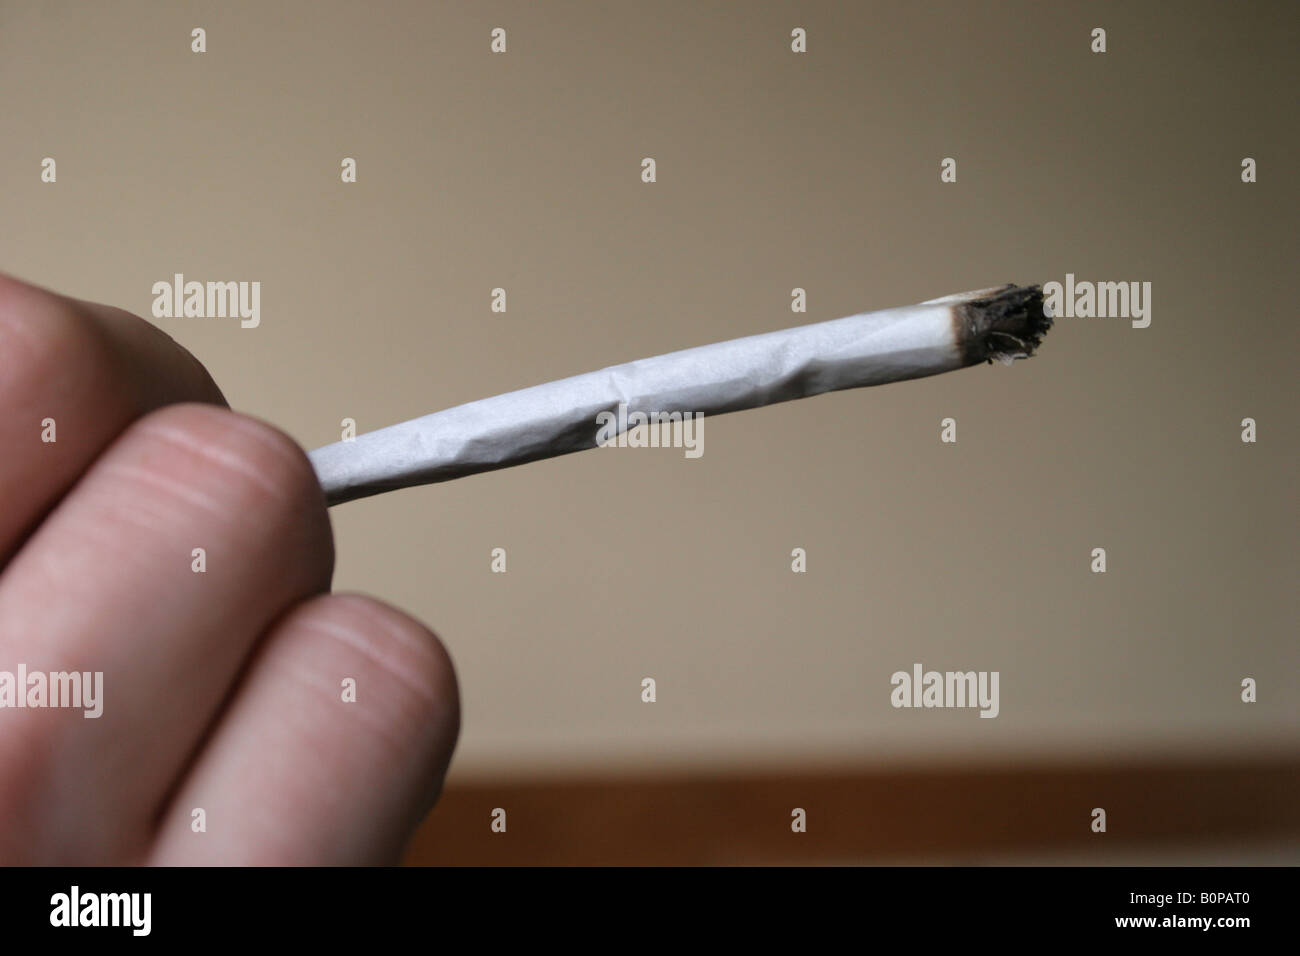 A cannabis spliff cigarette or joint being smoked, Amsterdam, Holland, The Netherlands. Stock Photo